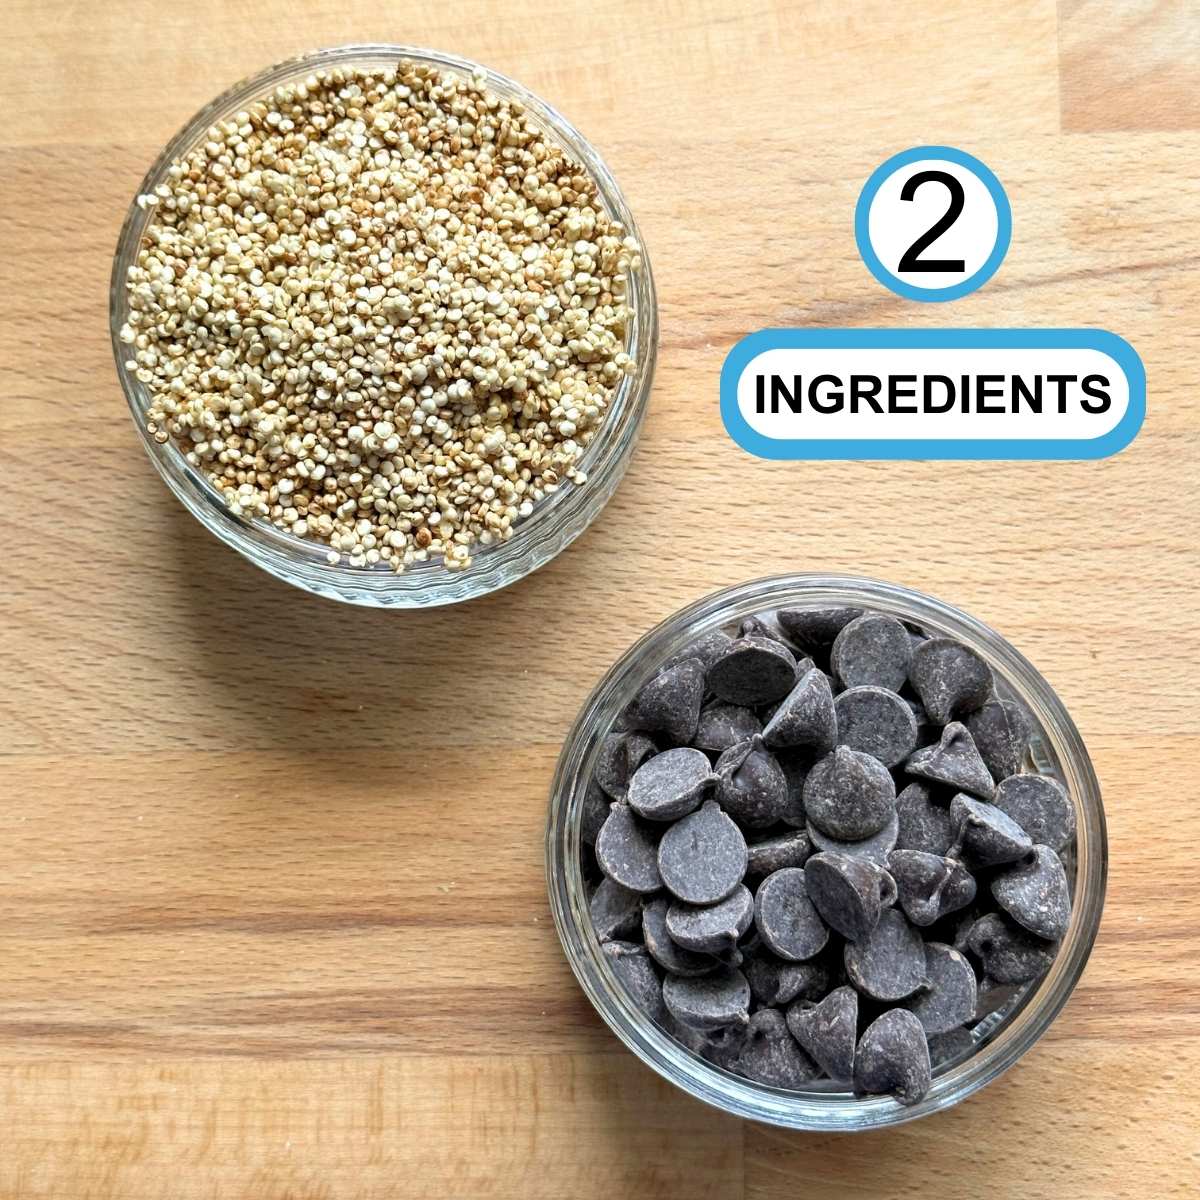 Ingredients for chocolate quinoa crunch bar in separate glass bowls: popped quinoa and chocolate chips. Text reads "2 INGREDIENTS" in Black on white background with blue border.